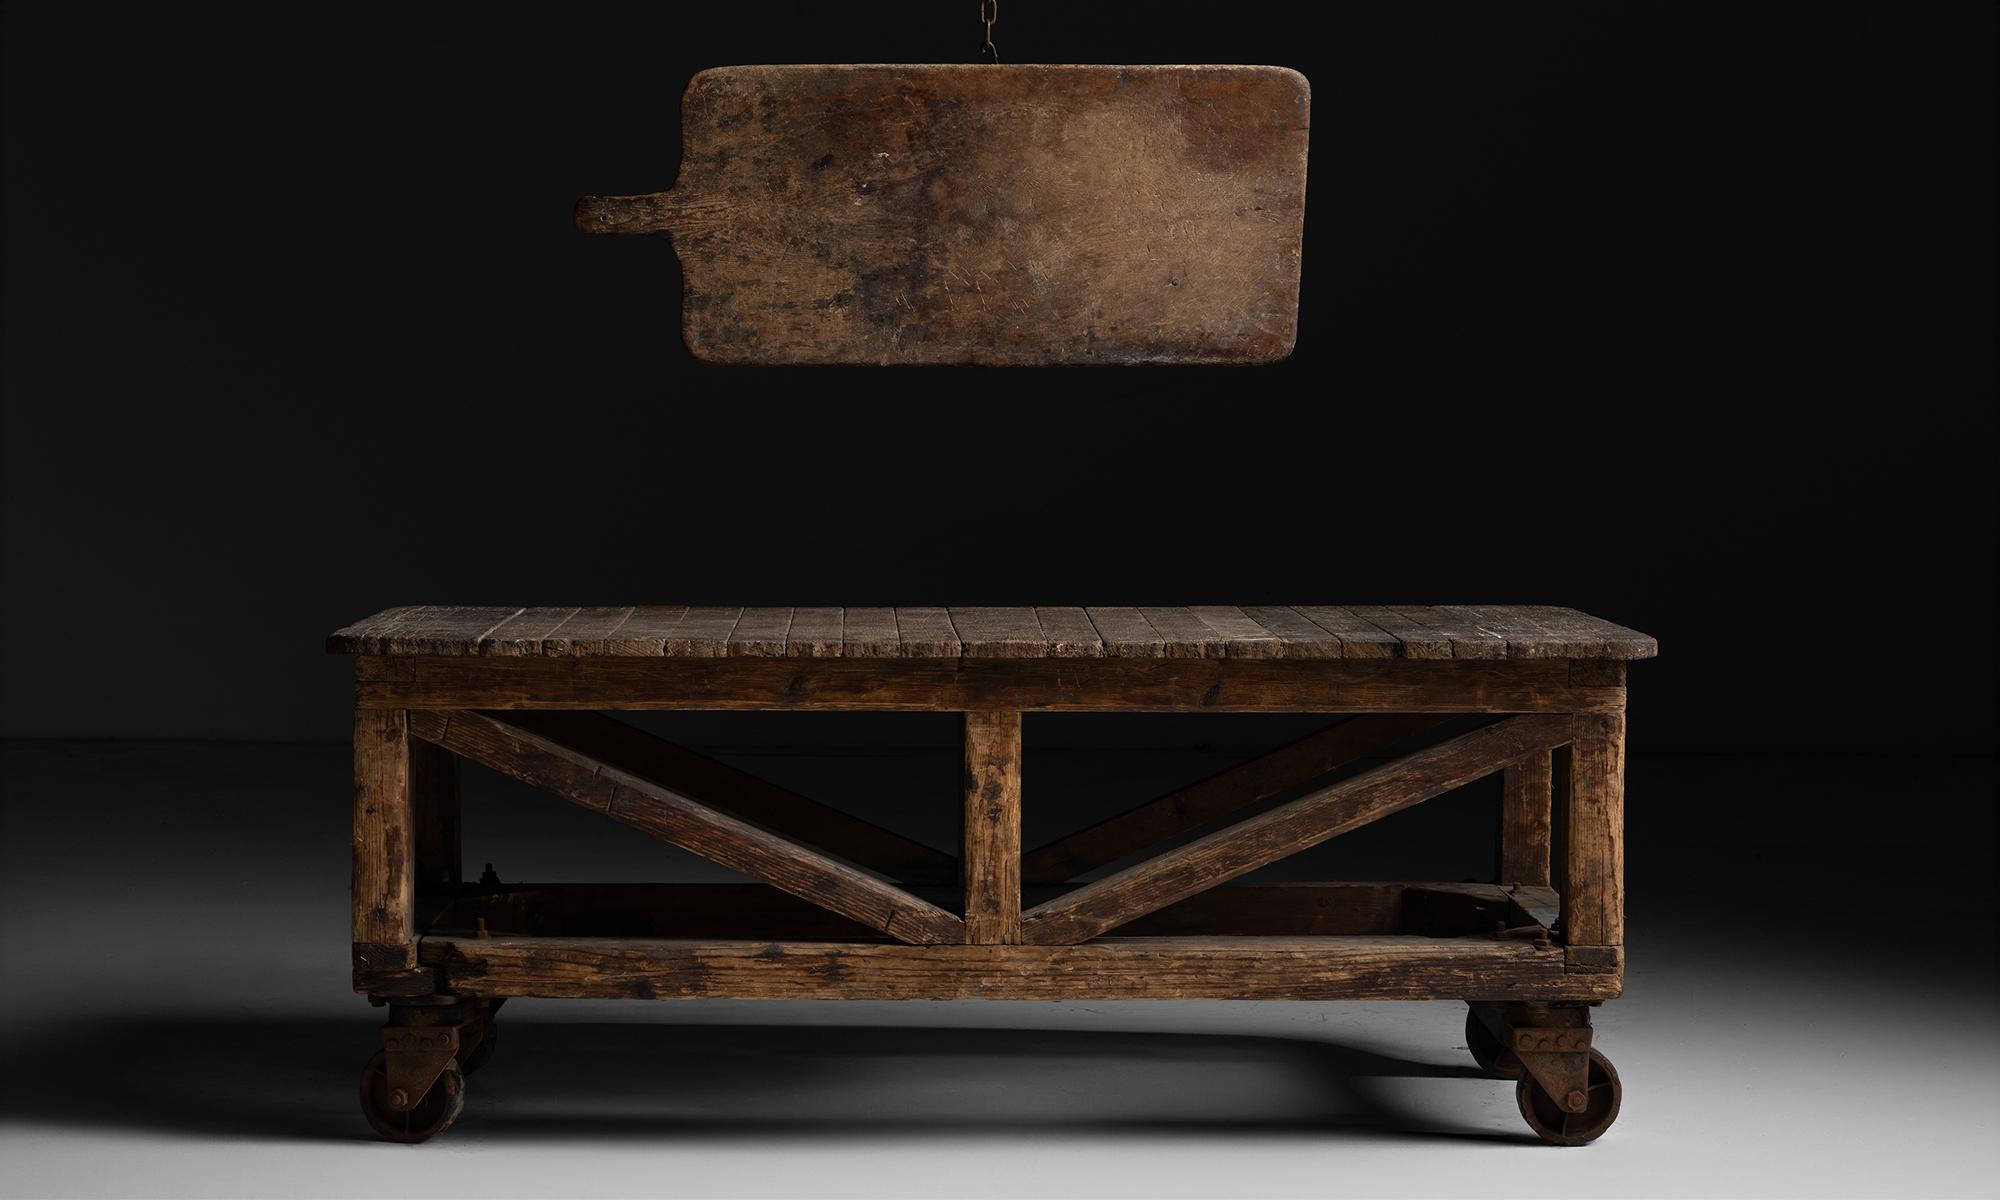 England circa 1930

Slatted oak top on pine base with industrial castors.

62.75”L x 29.75”d x 24.5”h